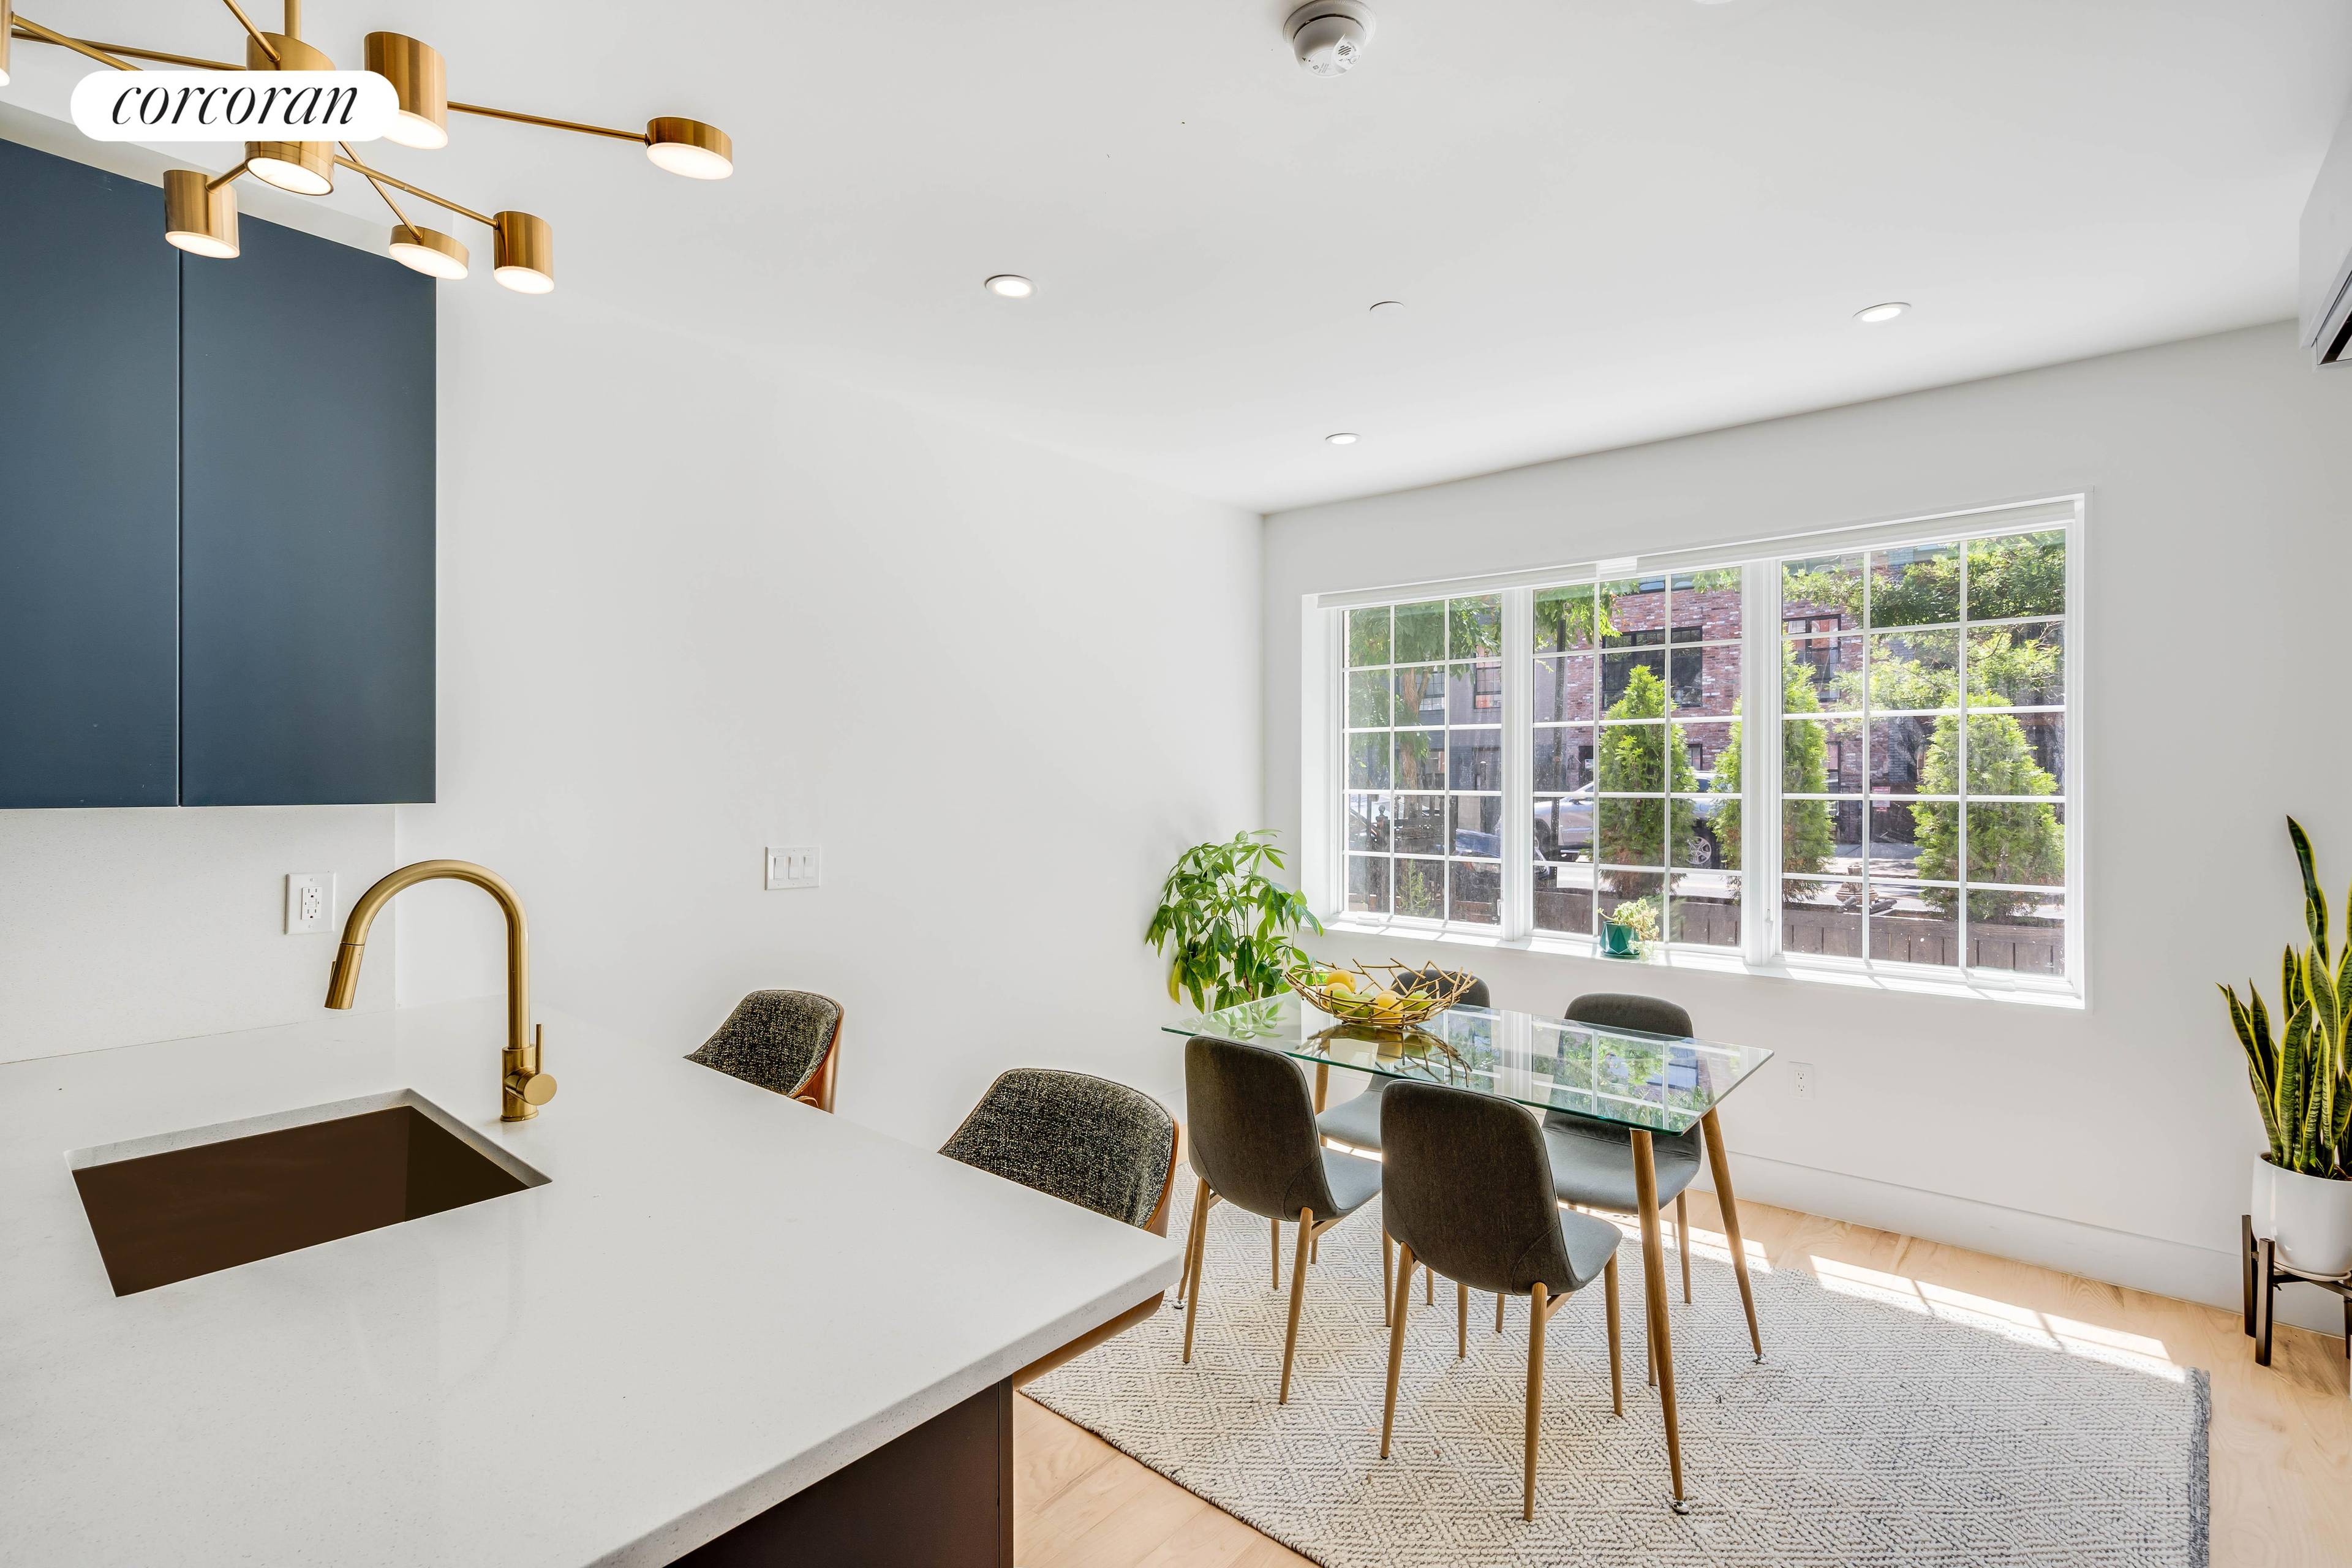 Welcome to 627 Halsey Street, a new boutique condominium in blossoming Bed Stuy, featuring 4 unique homes that have all been created with care and attention to detail.